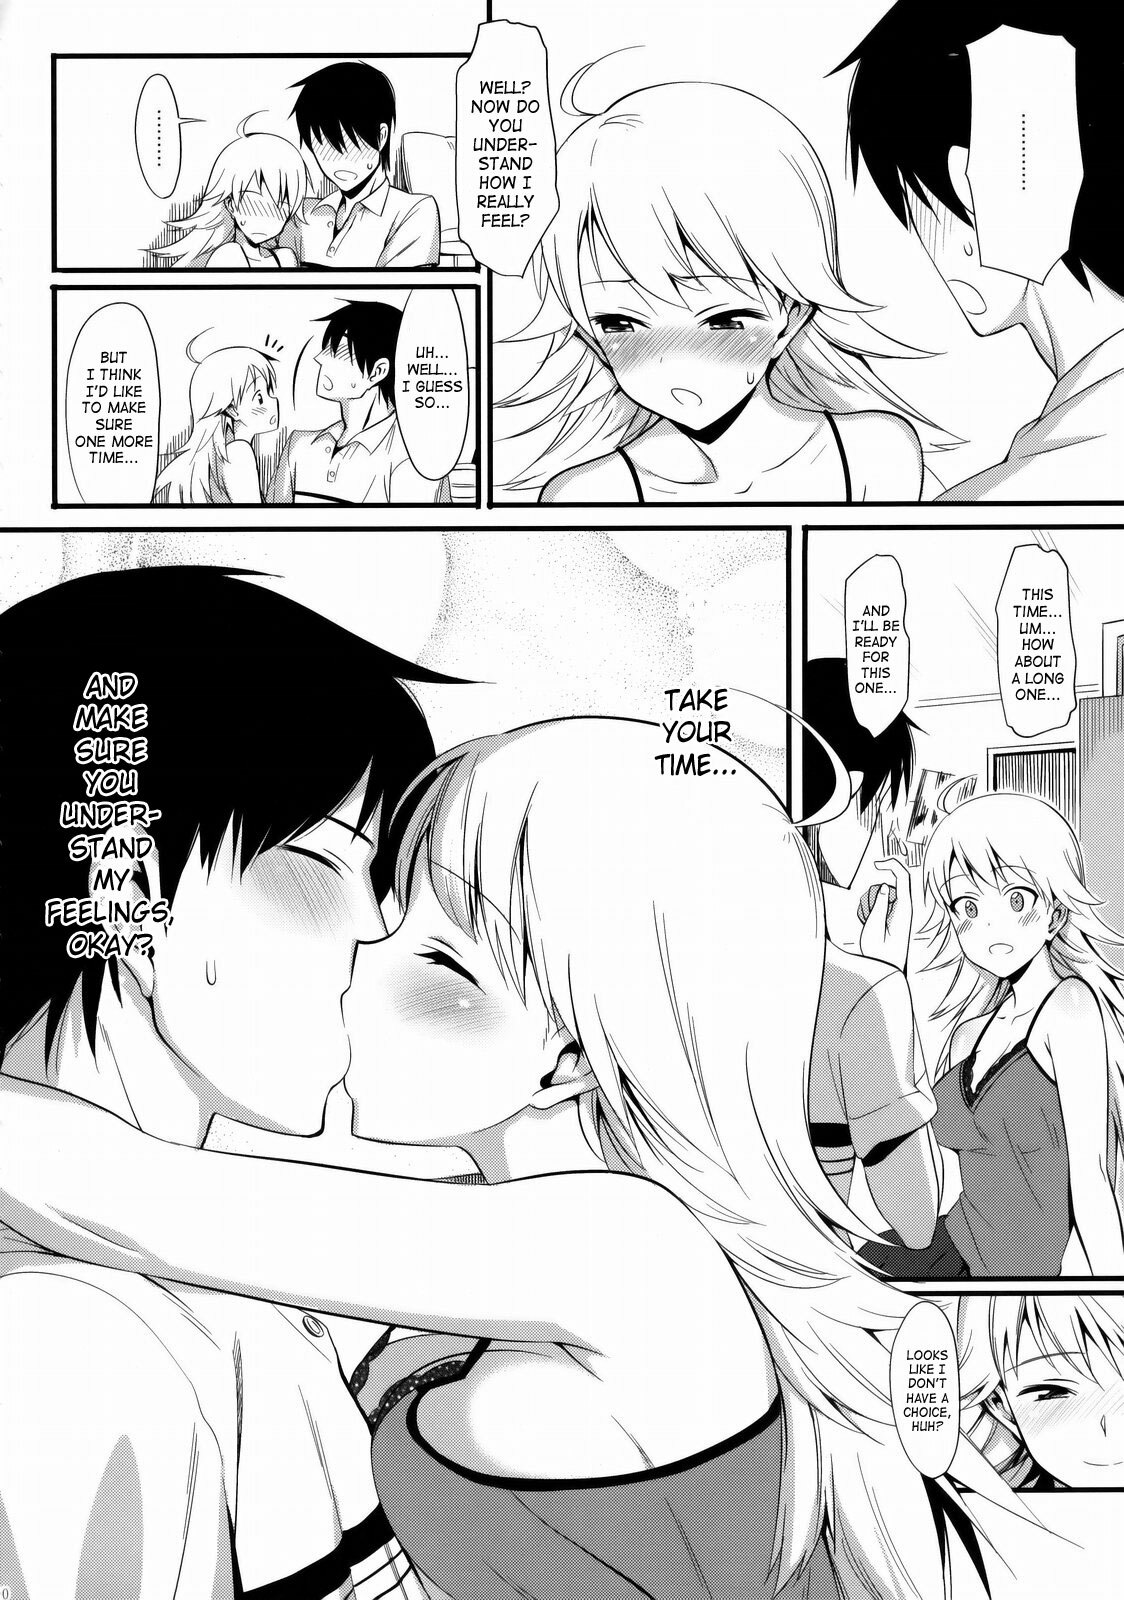 [TNC. (Lunch)] FIRST TIME x LAST TIME (THE iDOLM@STER) [English] {SaHa} page 9 full